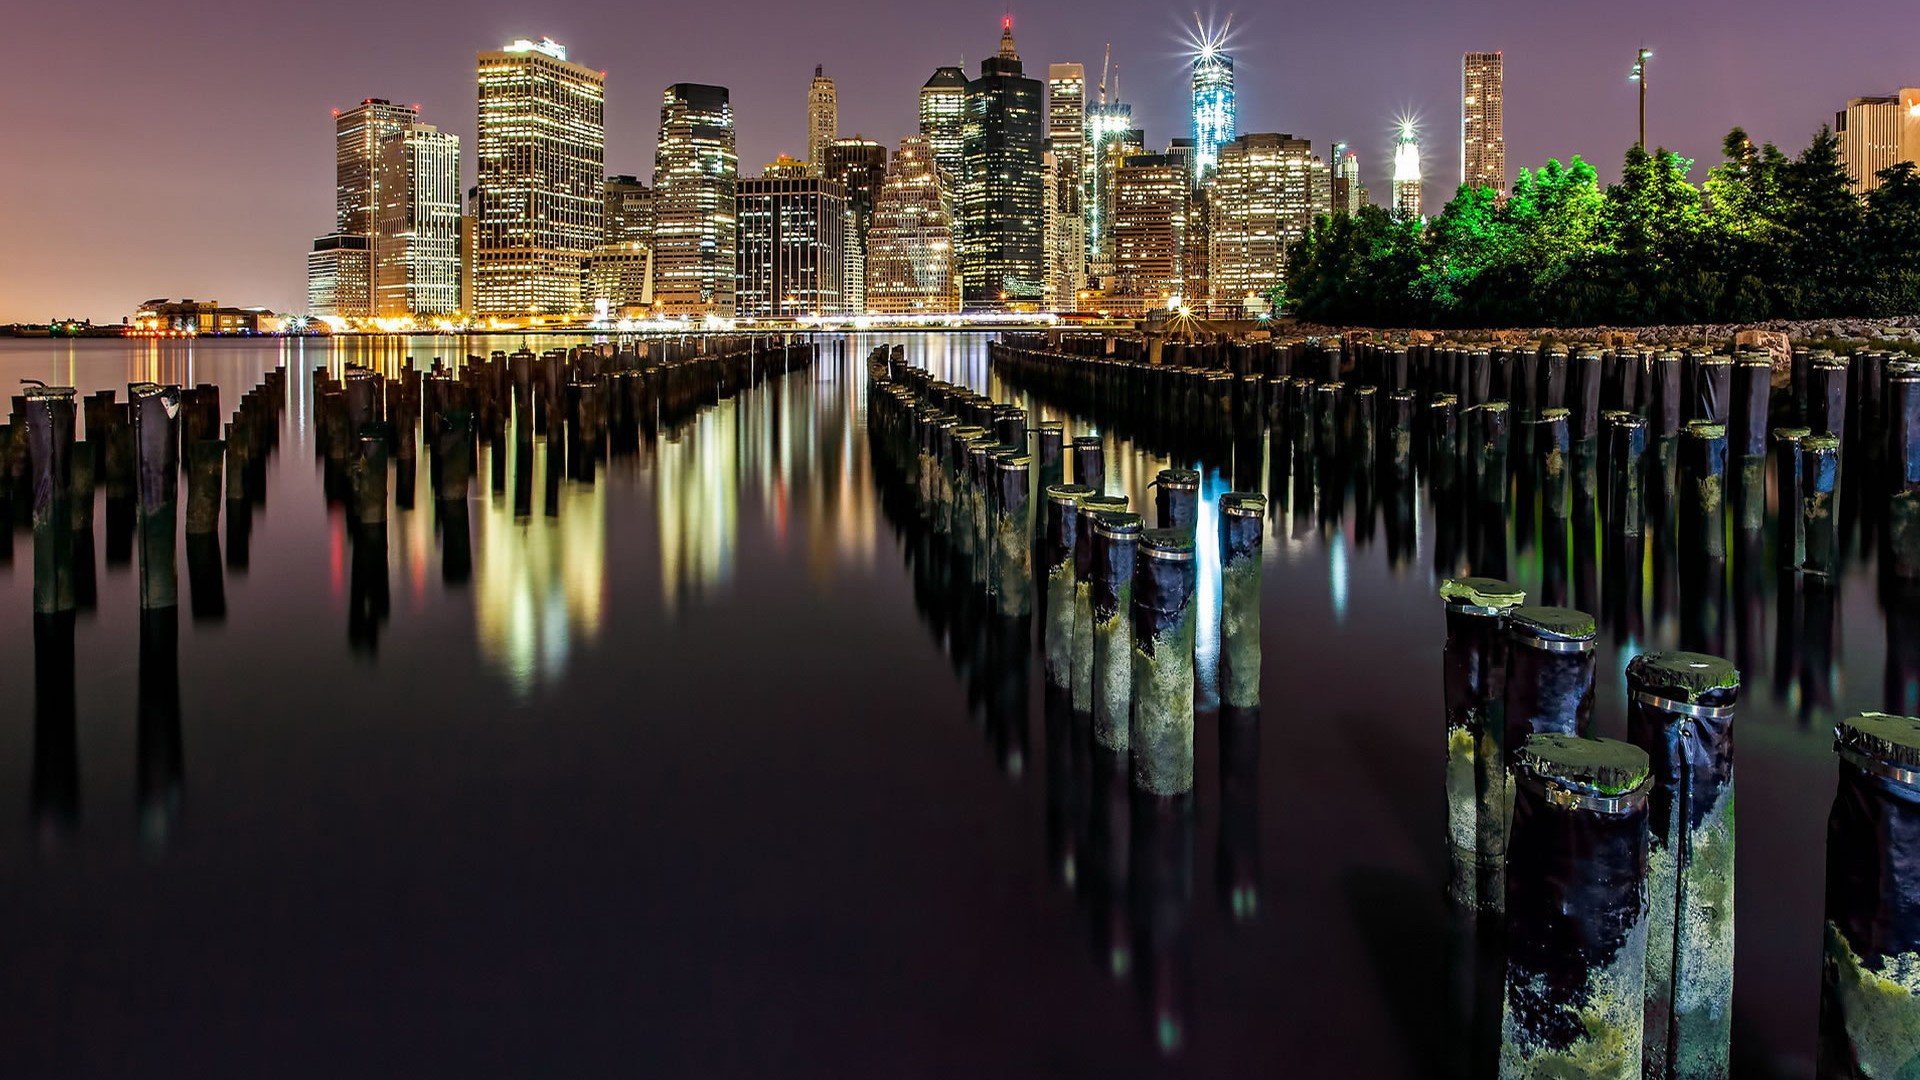 water, Landscapes, Dock, Skyscrapers, City, Lights, Reflections, Cities, Sea, Skyline Wallpaper